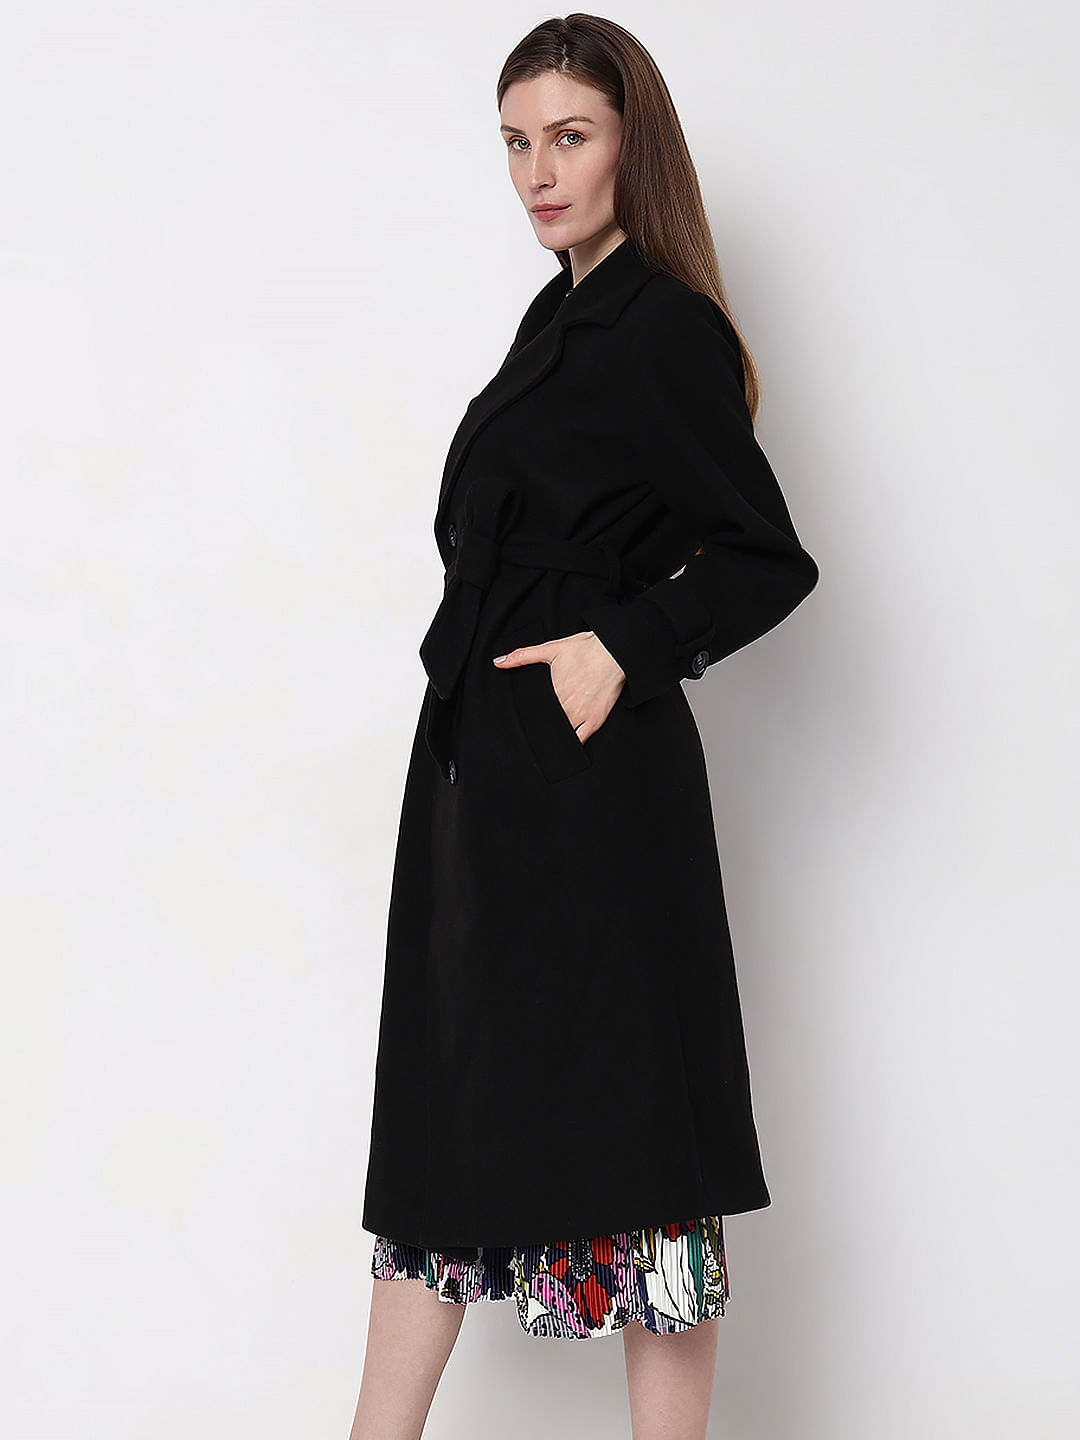 Steampunk Women Fashion Long Sleeve Velvet Tailcoat Jacket Vintage Gothic Long  Dress Coat Autumn Winter Vampire Trench Coat Outerwear Medieval Cosplay  Costume | Wish